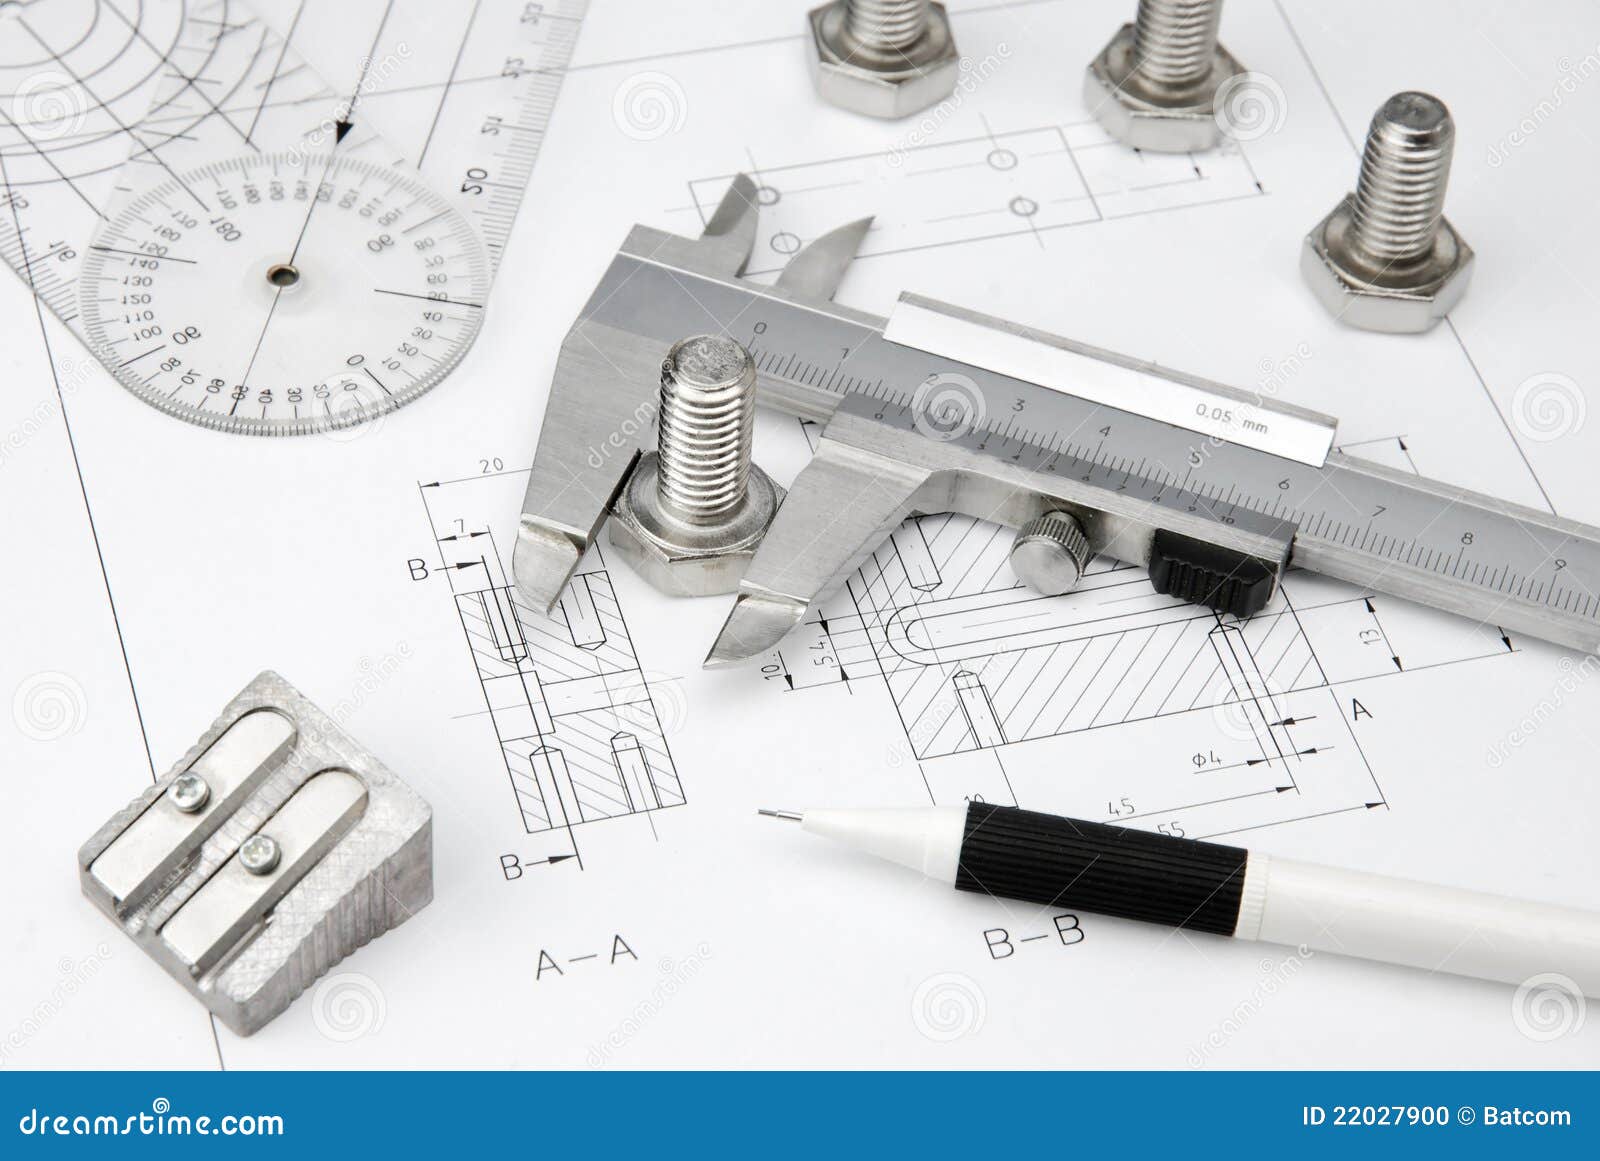 Technical Drawings Tools